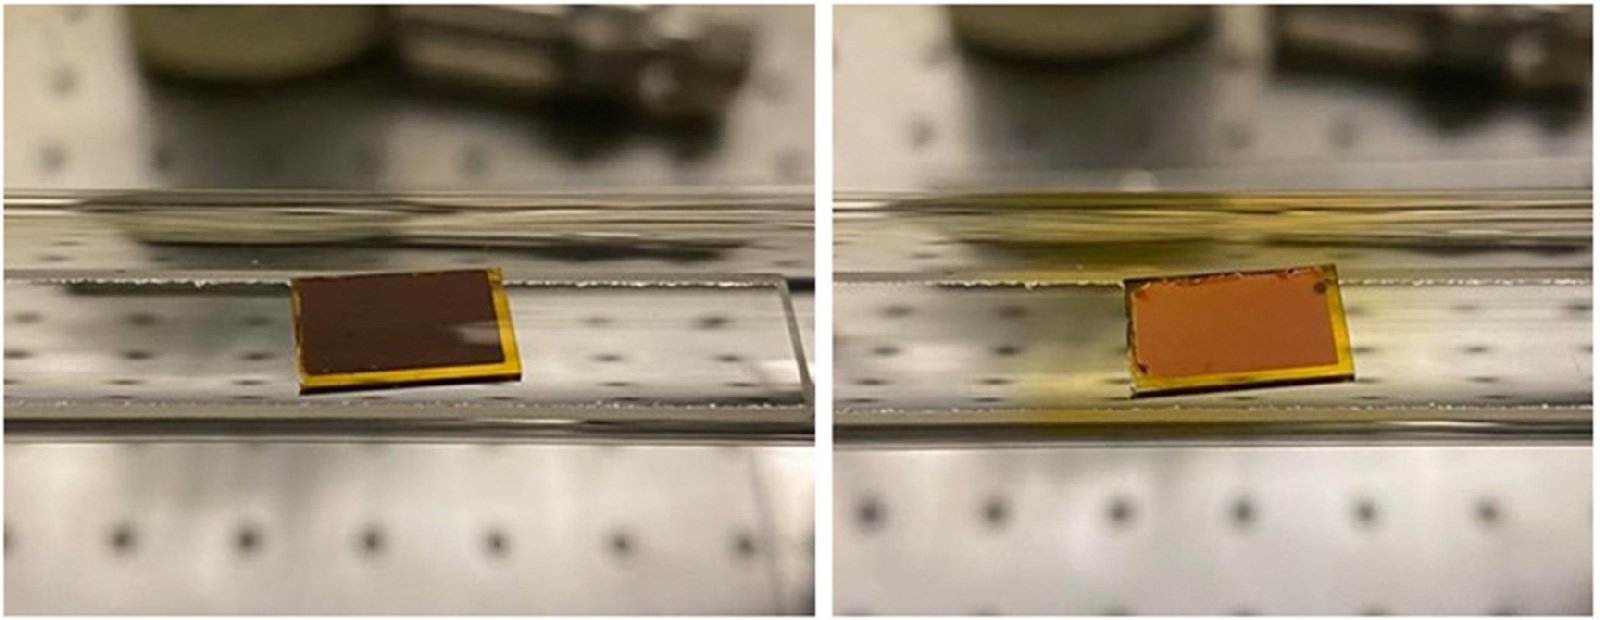 After a substrate is coated with graphene, it appears shinier (right). Photos courtesy of Caltech.